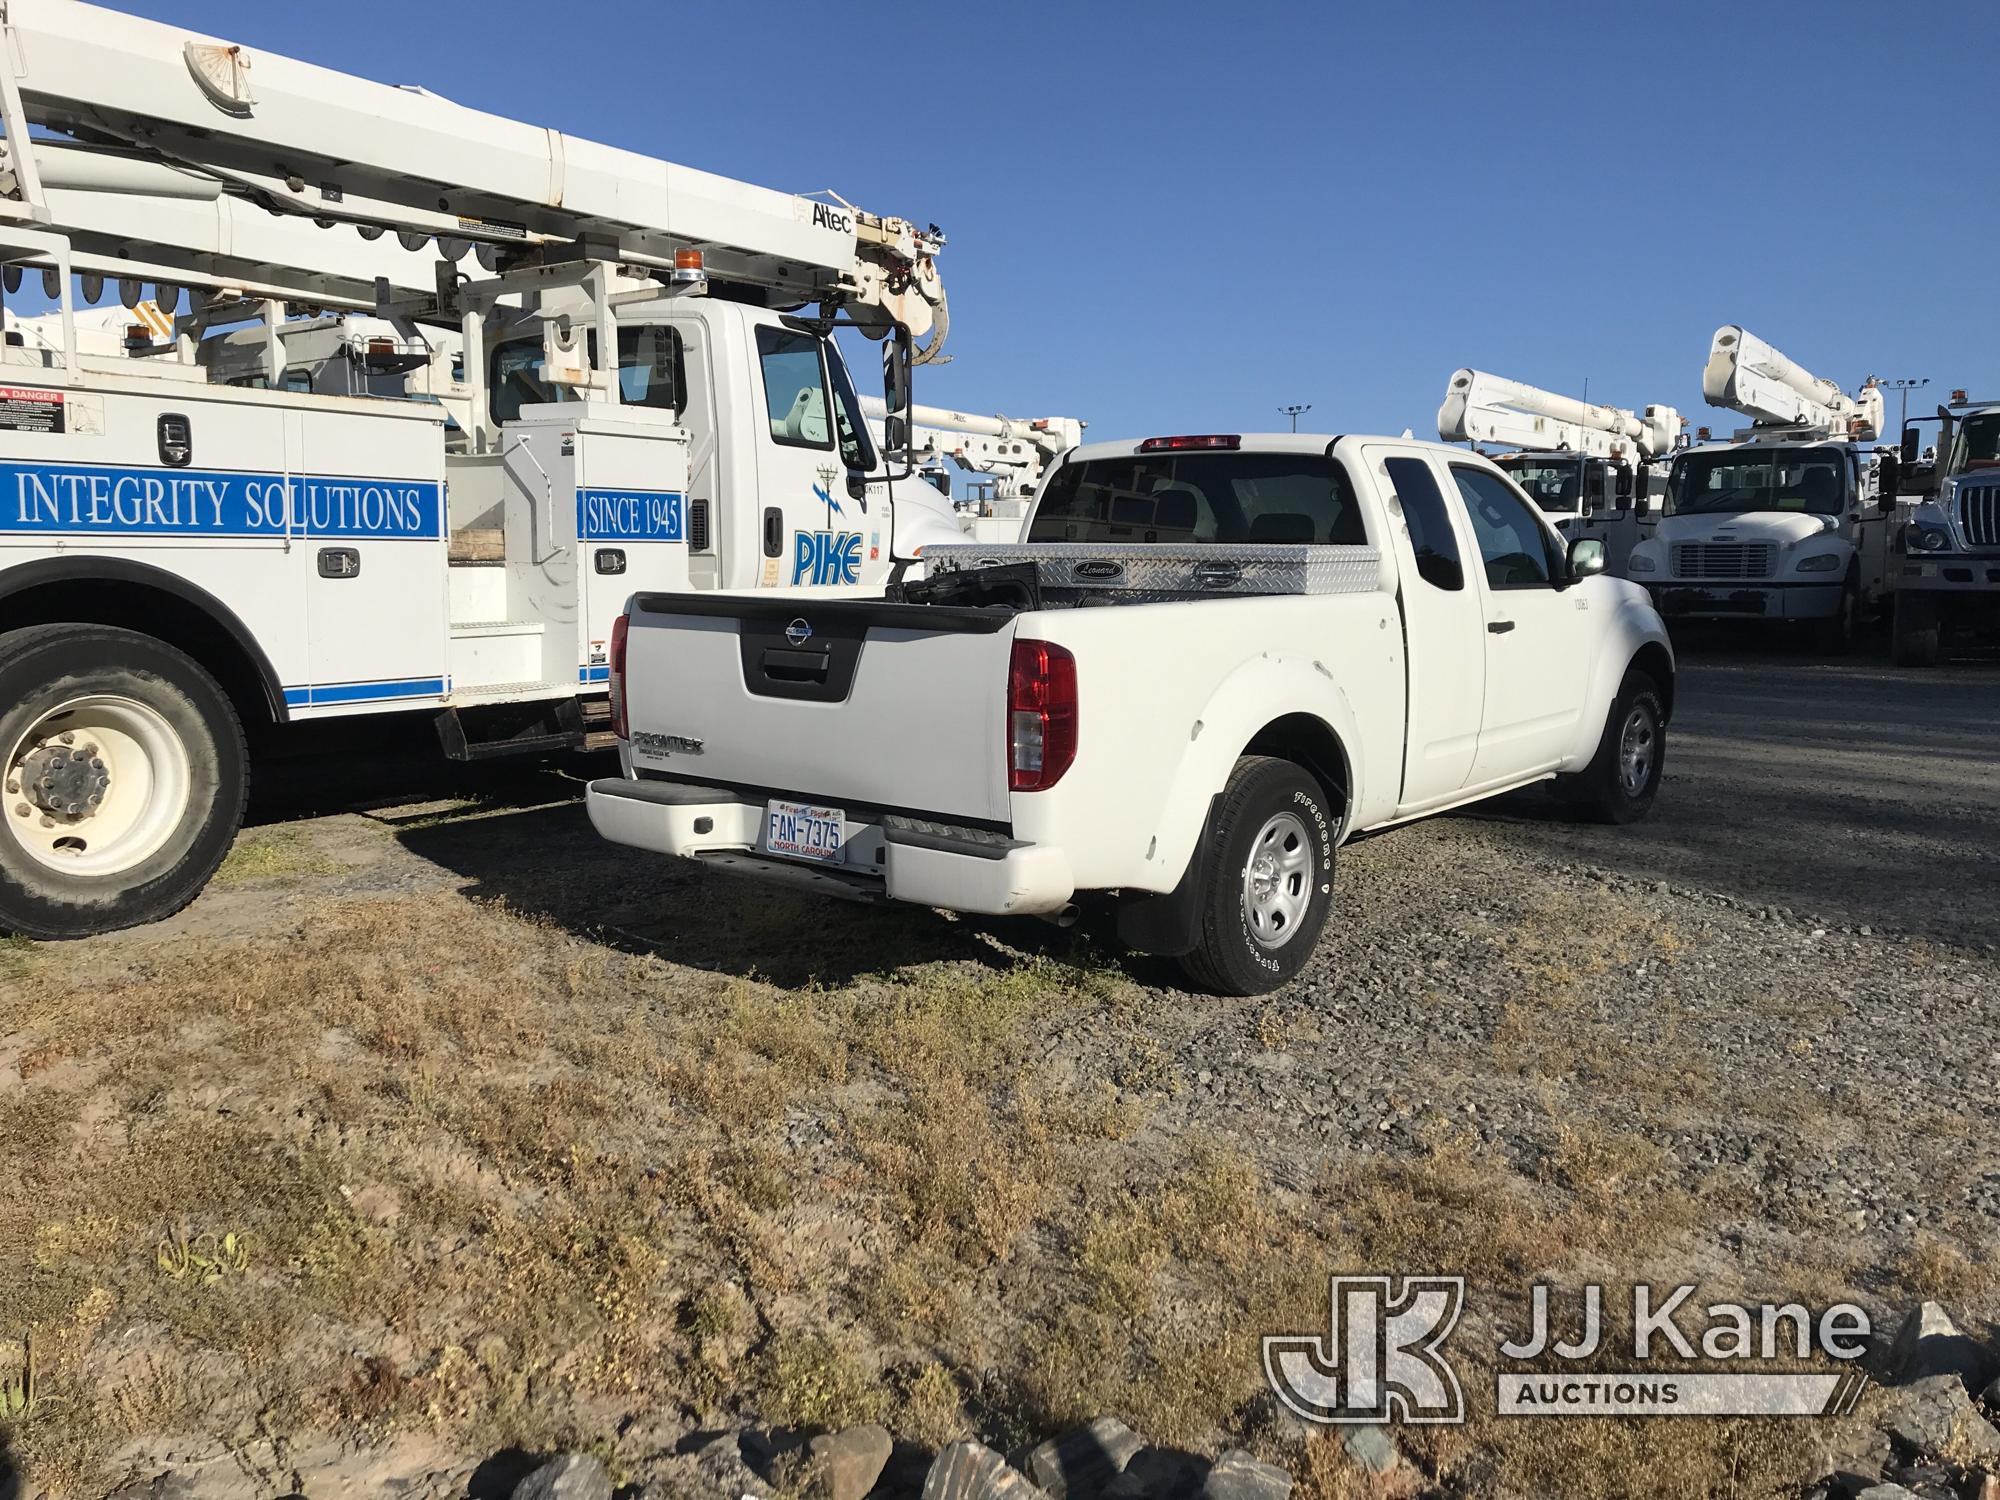 (Mount Airy, NC) 2017 Nissan Frontier Extended-Cab Pickup Truck Not Running, Condition Unknown, Engi